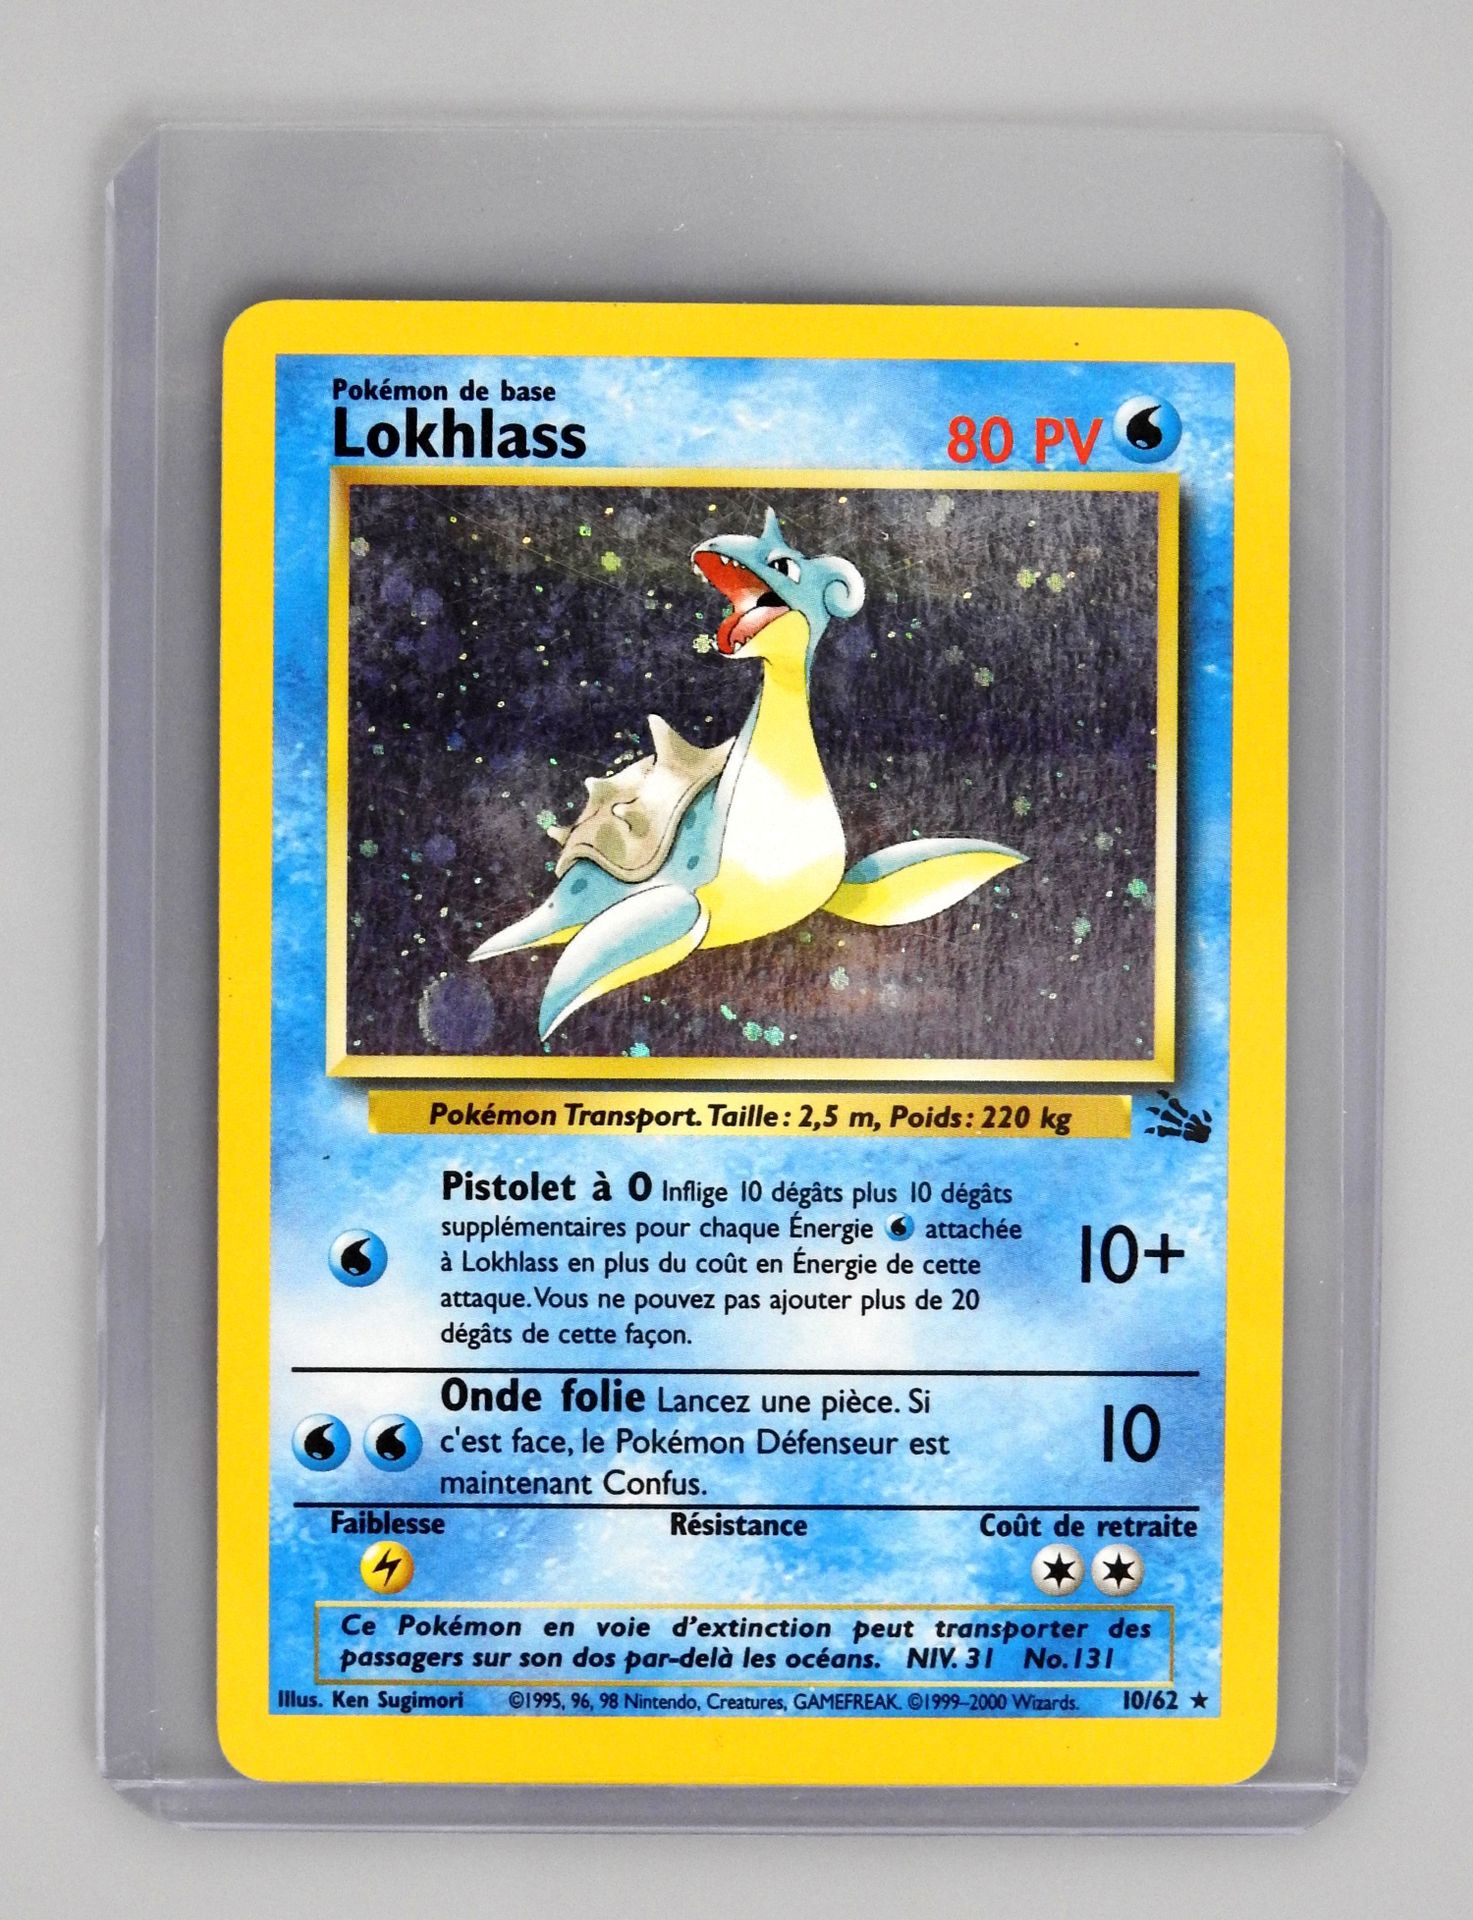 Null LOCKLASS

Wizards Fossil Block 10/62

Pokemon card in great condition